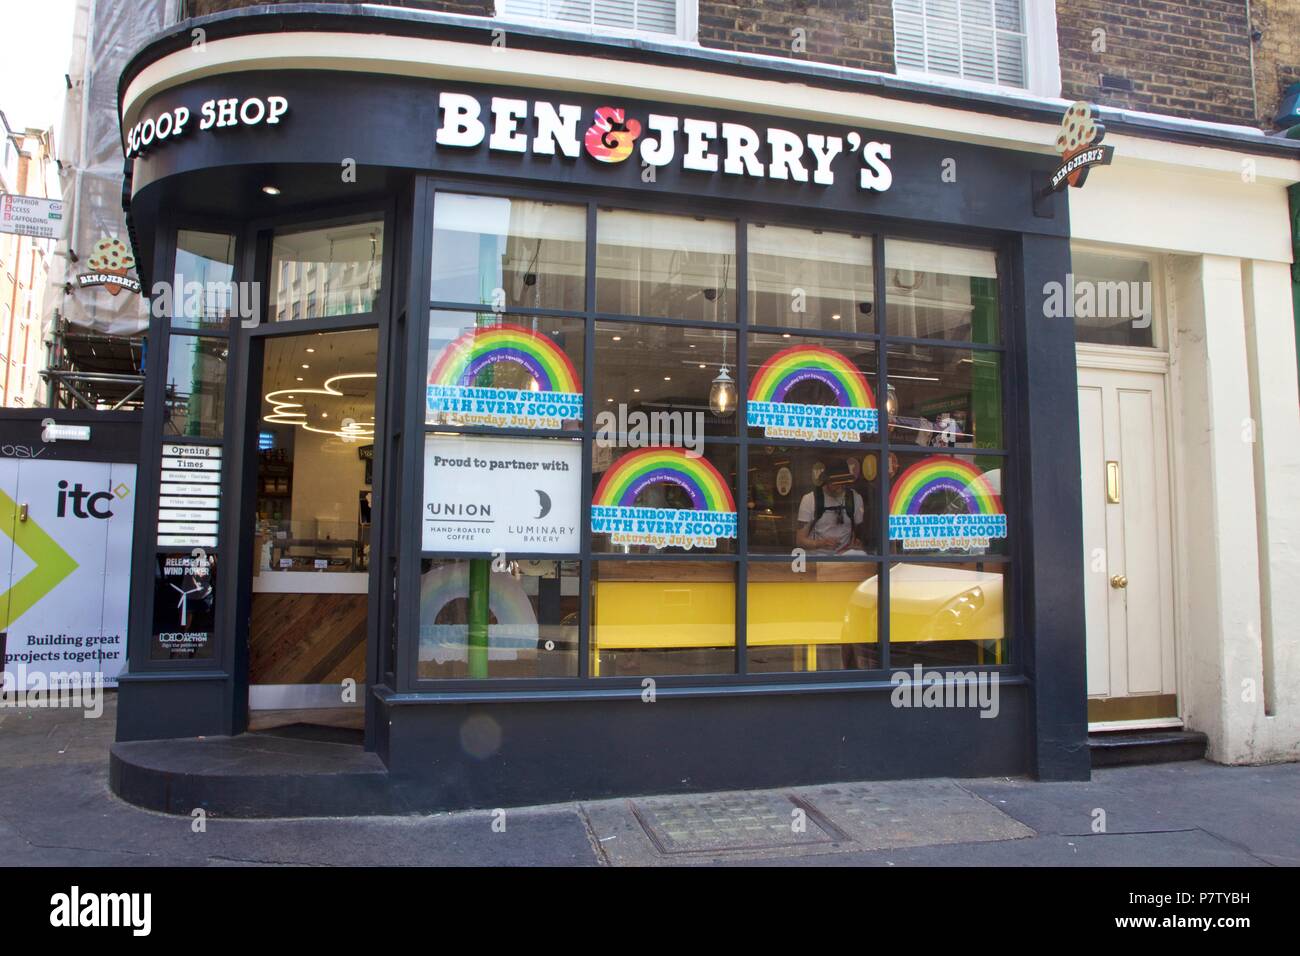 London, UK. 7th July 2018. Pride celebrations in London. Ben&Jerry's on Wardour Street, Soho, London celebrating Pride in London 2018 by offering free rainbow sprinkles with every scoop. Credit: Dimple Patel/Alamy Live News Stock Photo